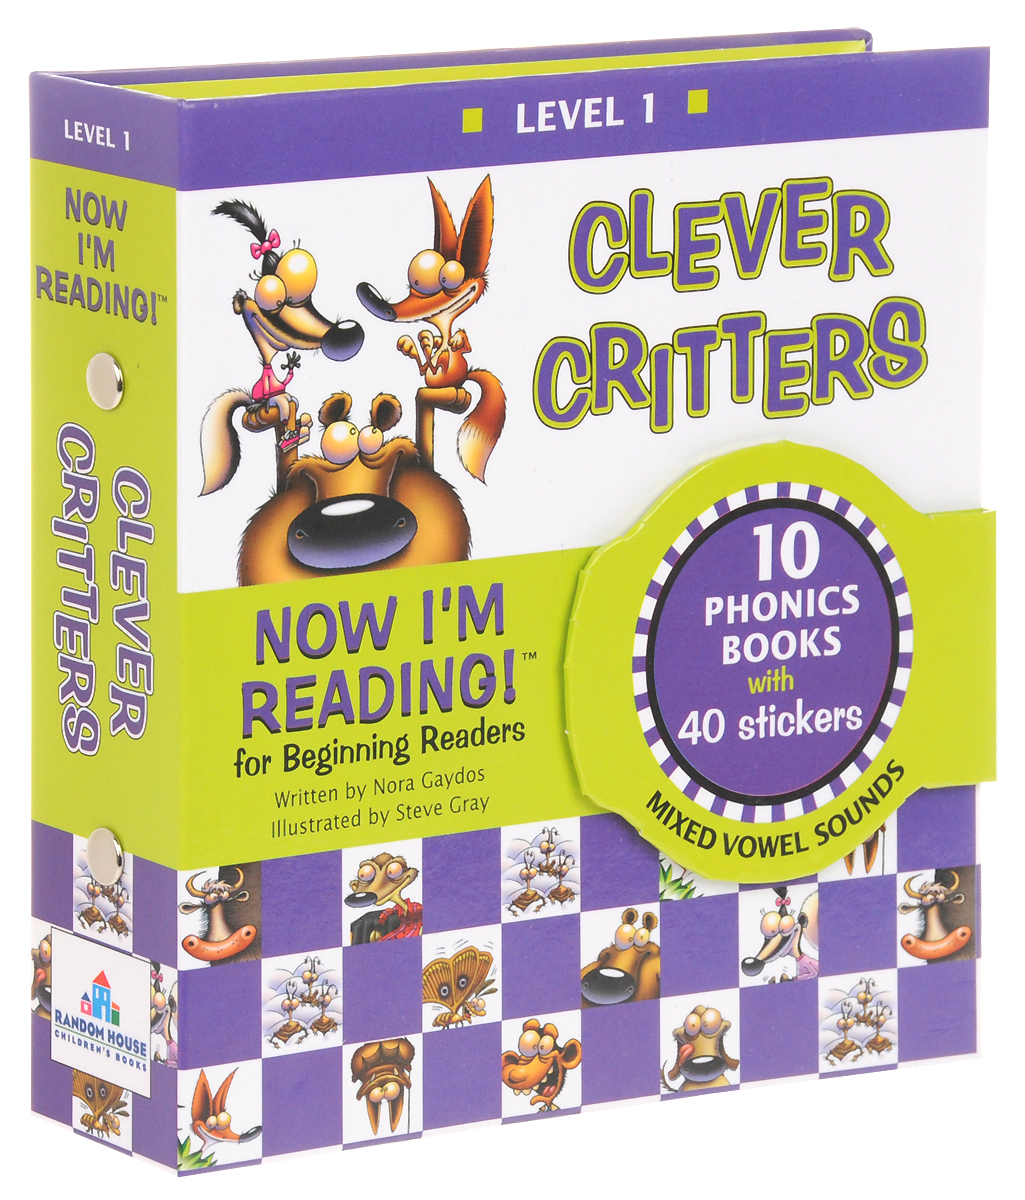 Now I'm Reading! Level 1: Clever Critters ( +40 stickers)